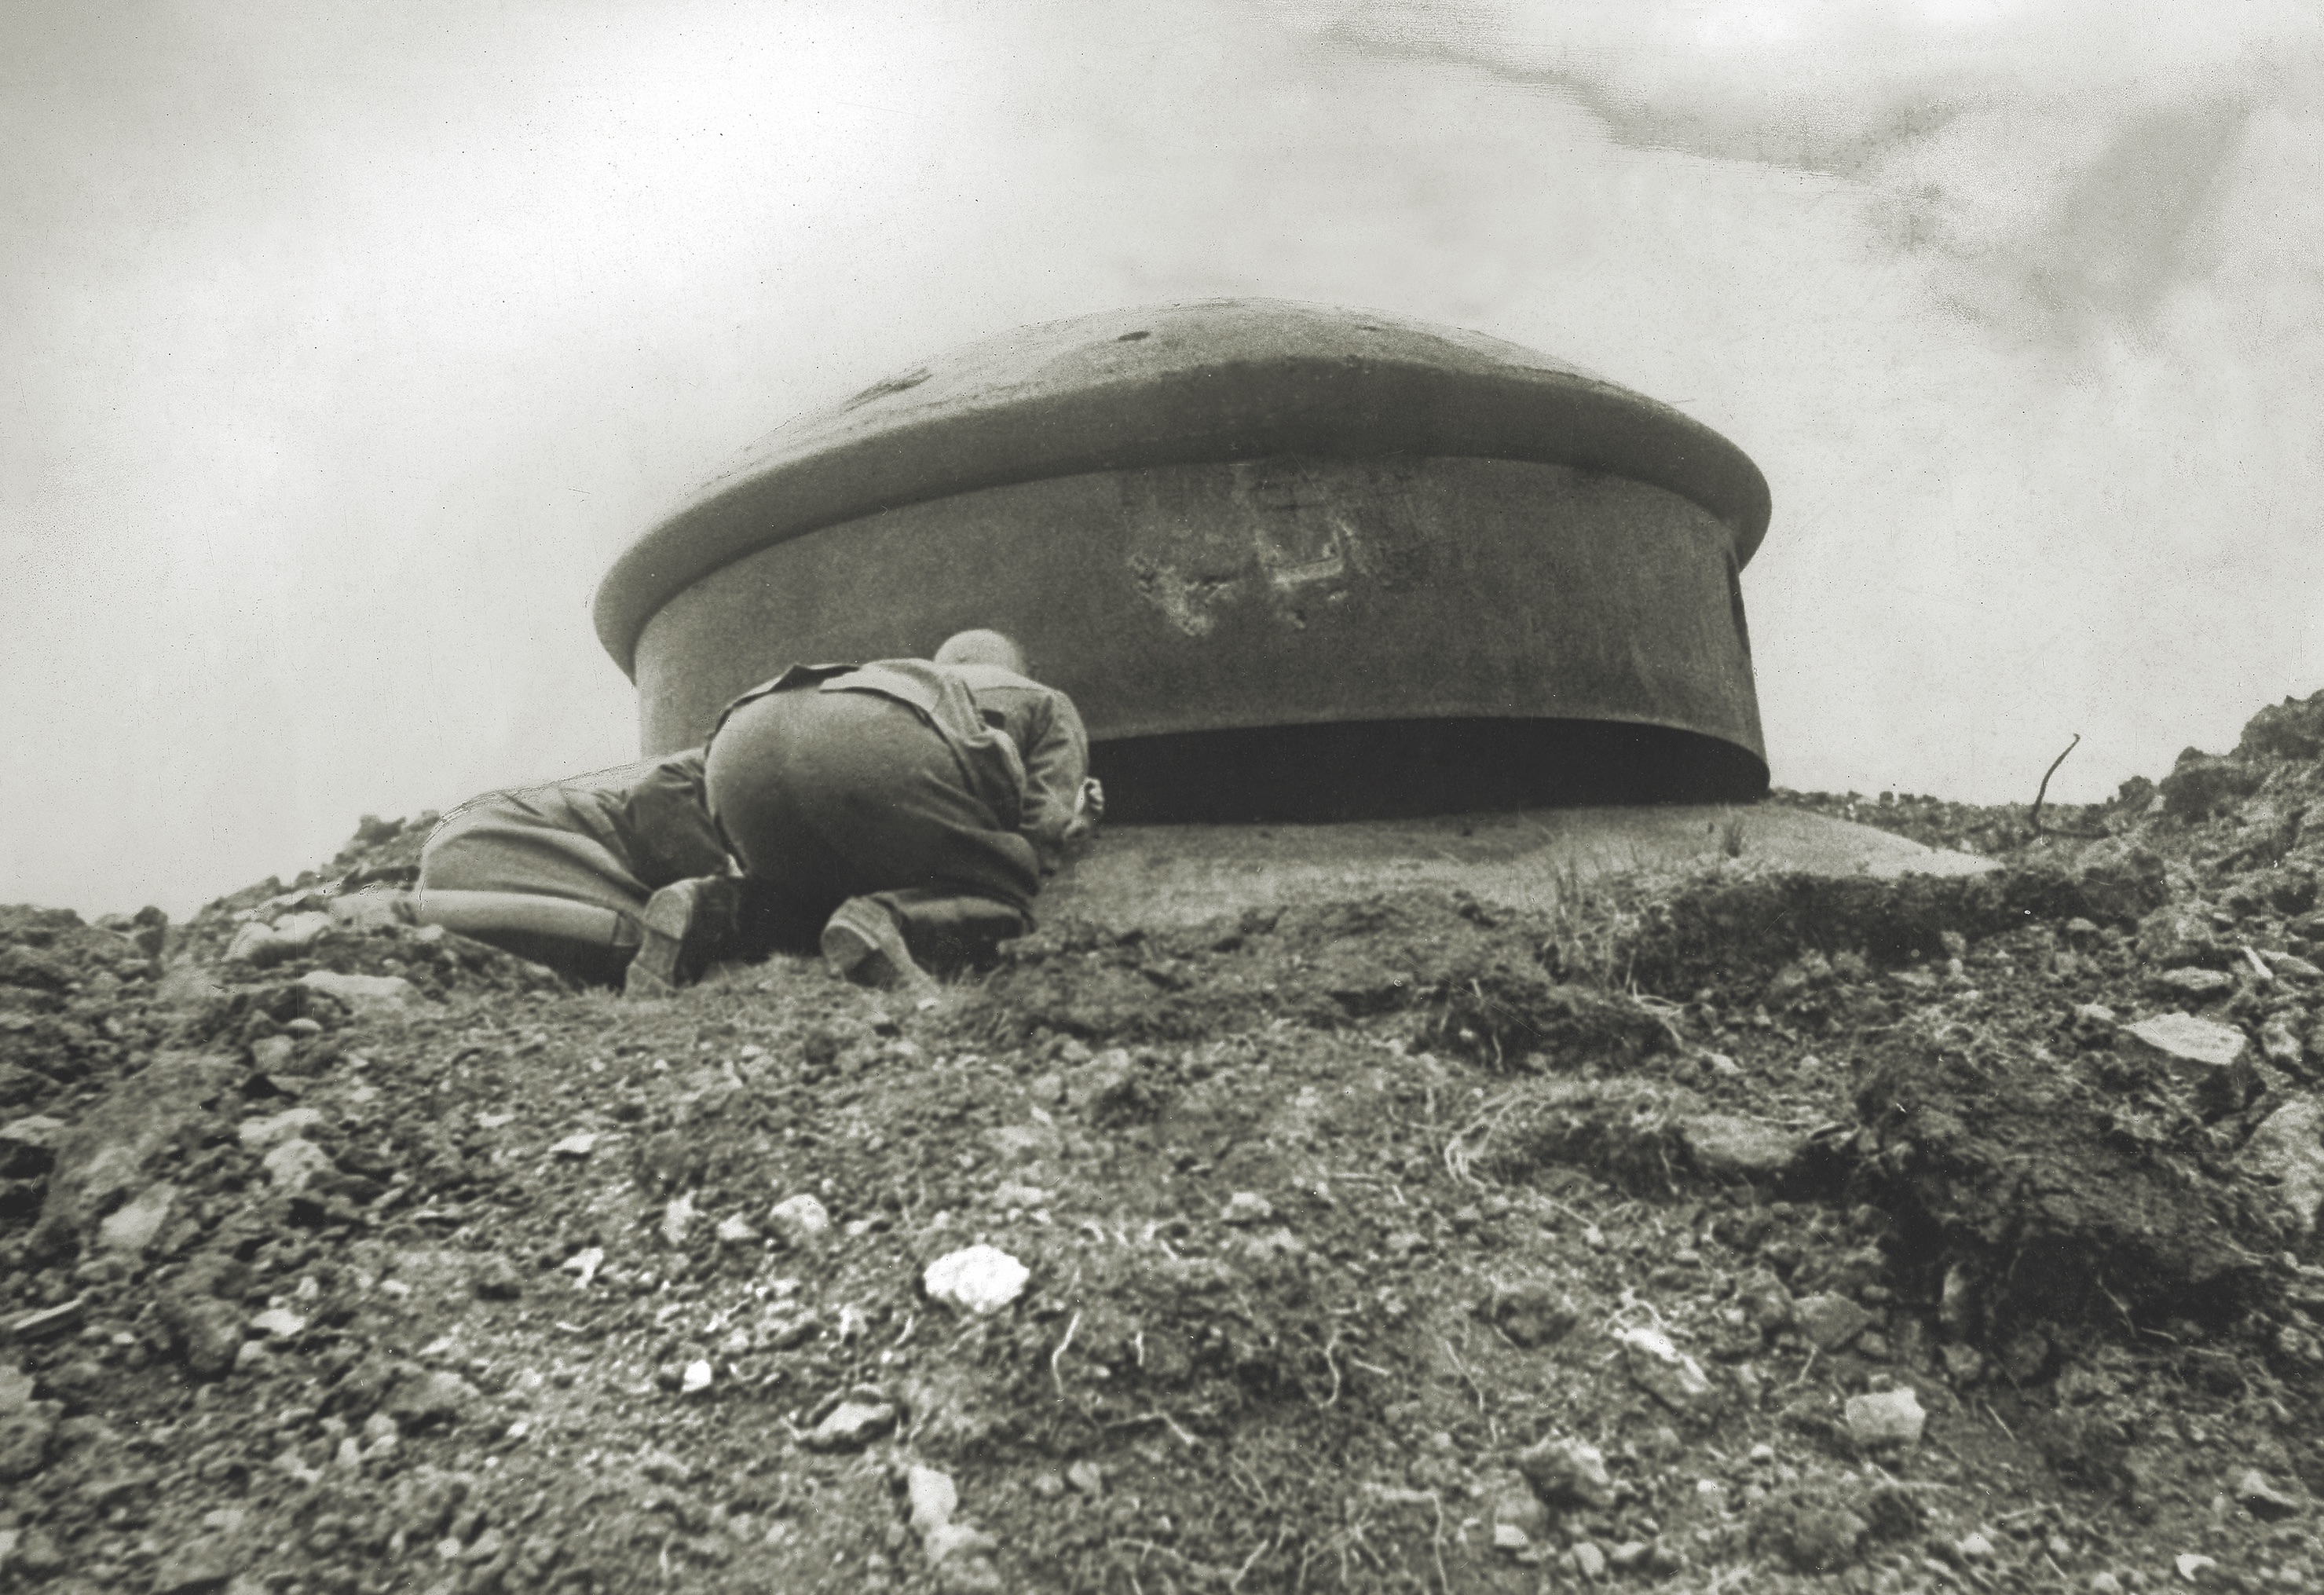 German sappers closely examine the gap beneath a displaced domed cloche. (Ullstein Bild, Getty Images)